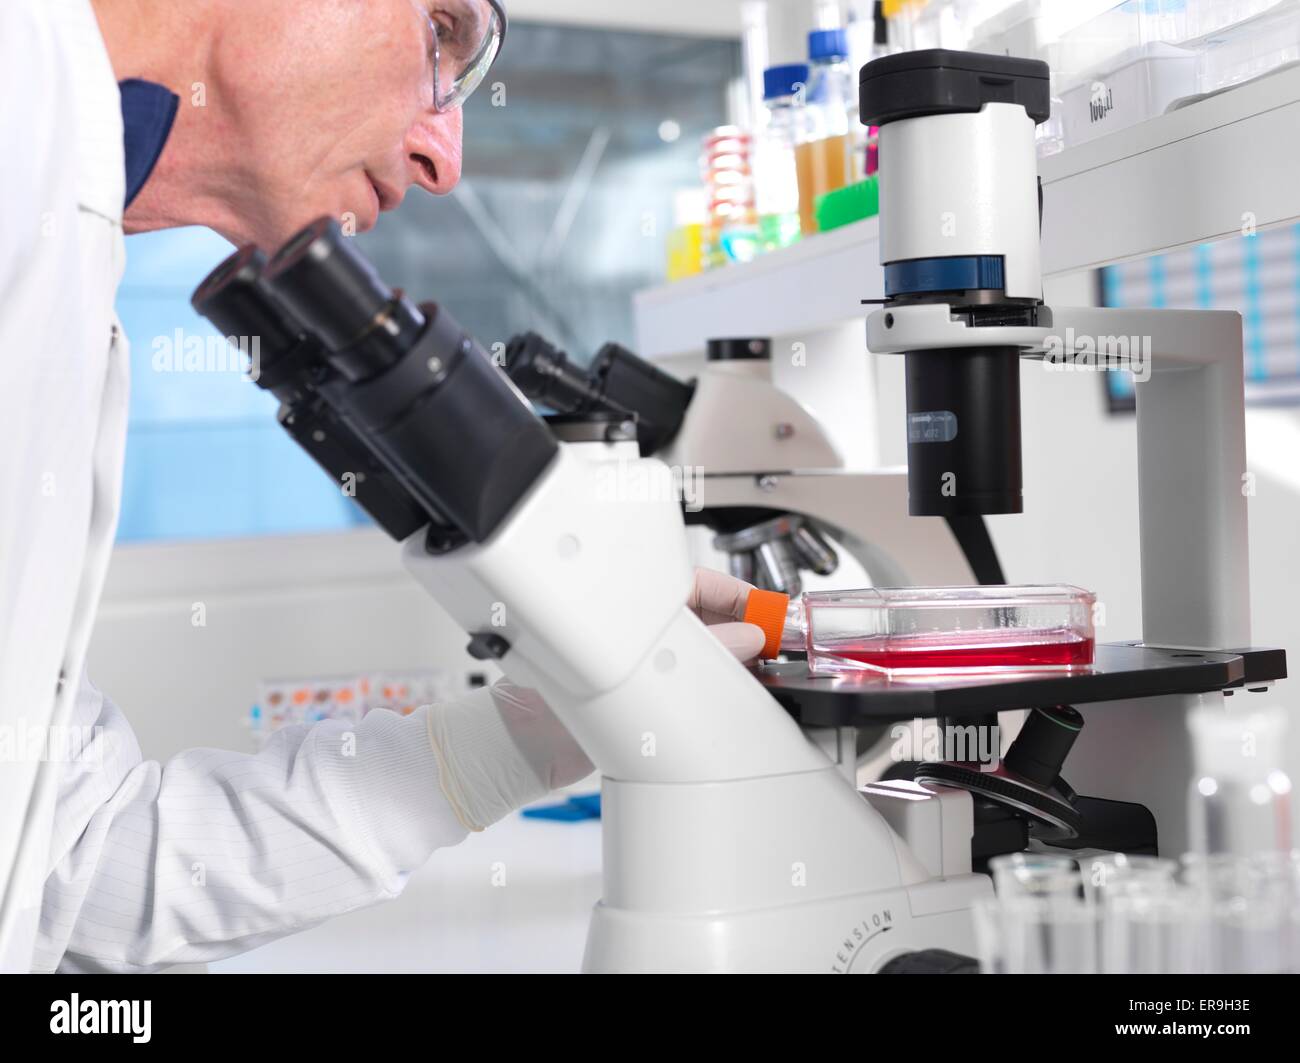 PROPERTY RELEASED. MODEL RELEASED. Stem Cell Research. Laboratory researcher using a light microscope to examine stem cells in a culture jar. Stock Photo